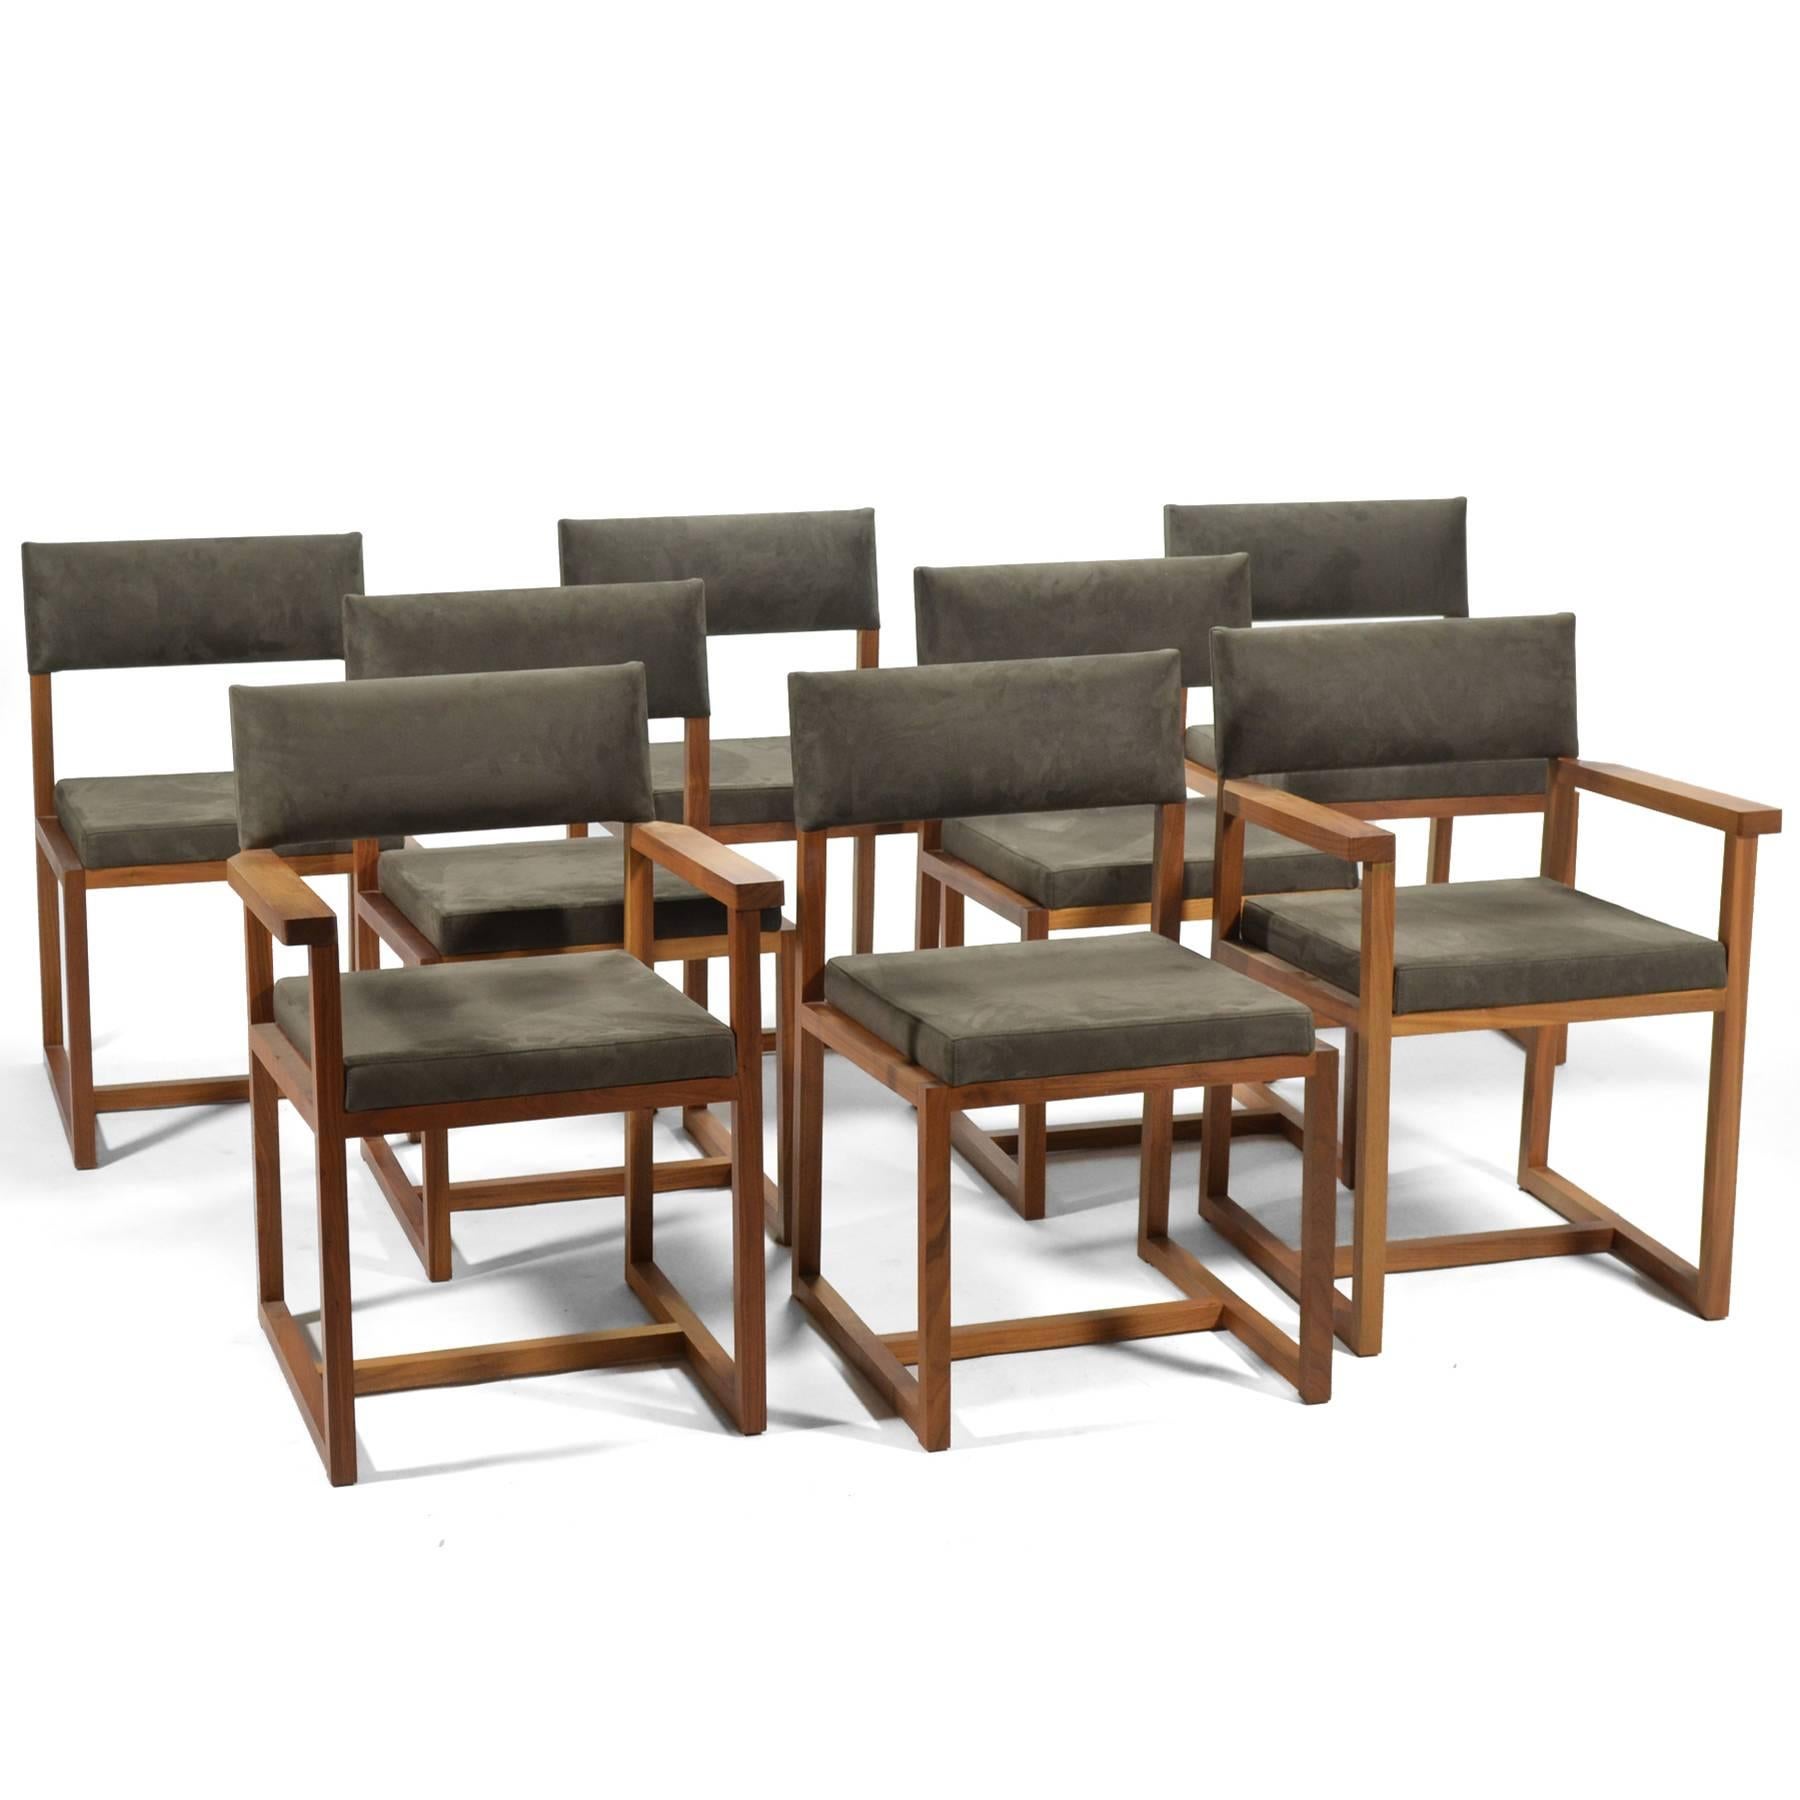 This set of eight dining chairs by De La Espada are made of rich, solid black American walnut and are upholstered in a nice gray ultrasuede. The model 133 